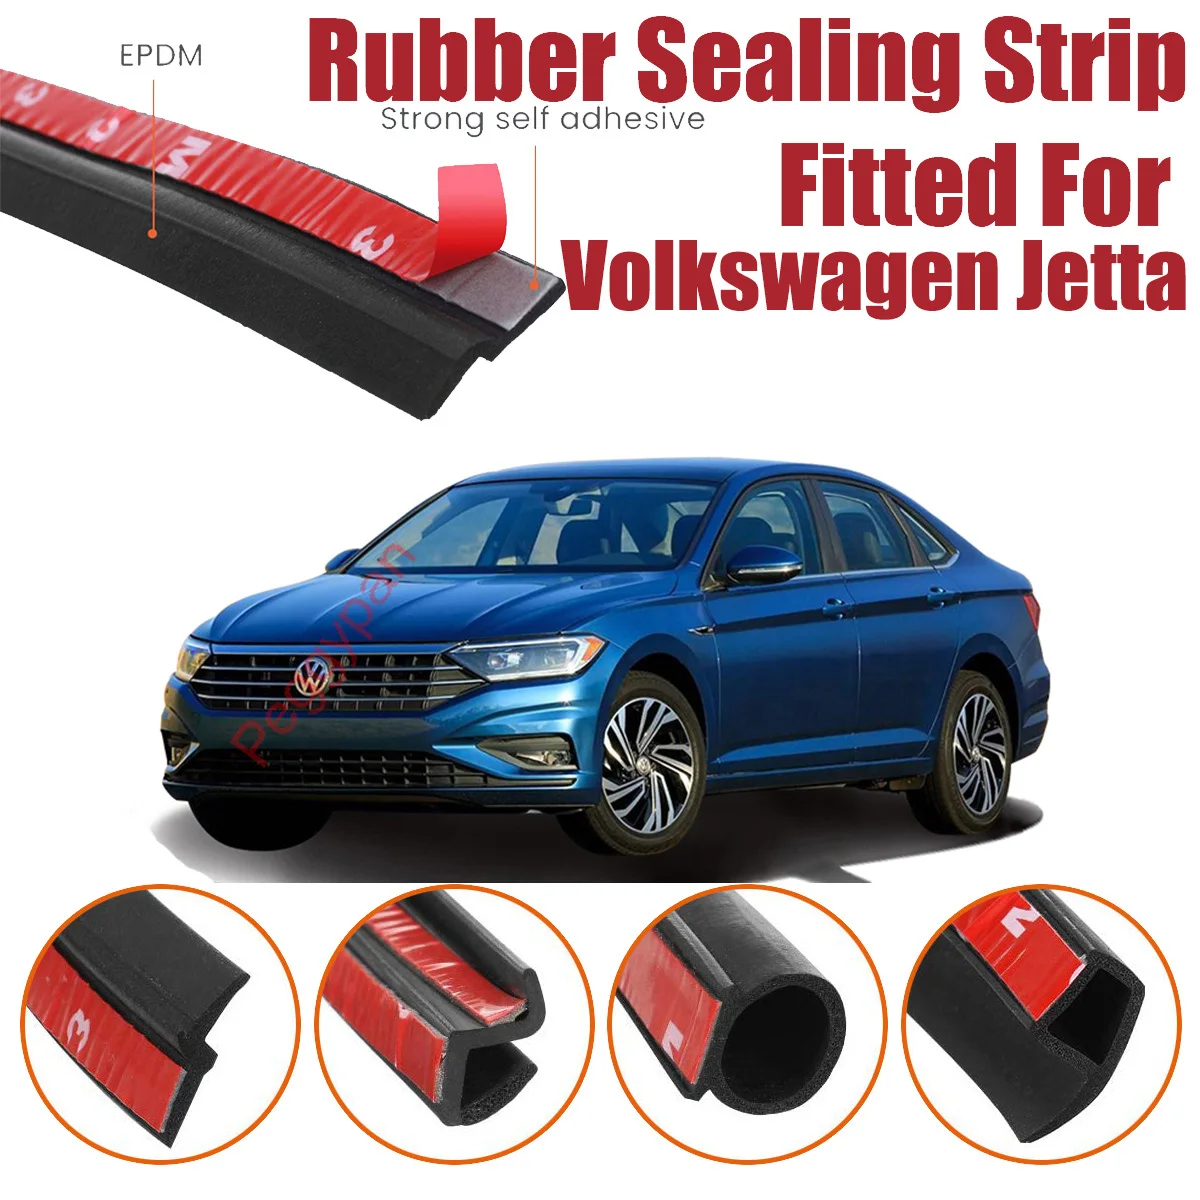 Door Seal Strip Kit Self Adhesive Window Engine Cover Soundproof Rubber Weather Draft Noise Reduction For Volkswagen Jetta